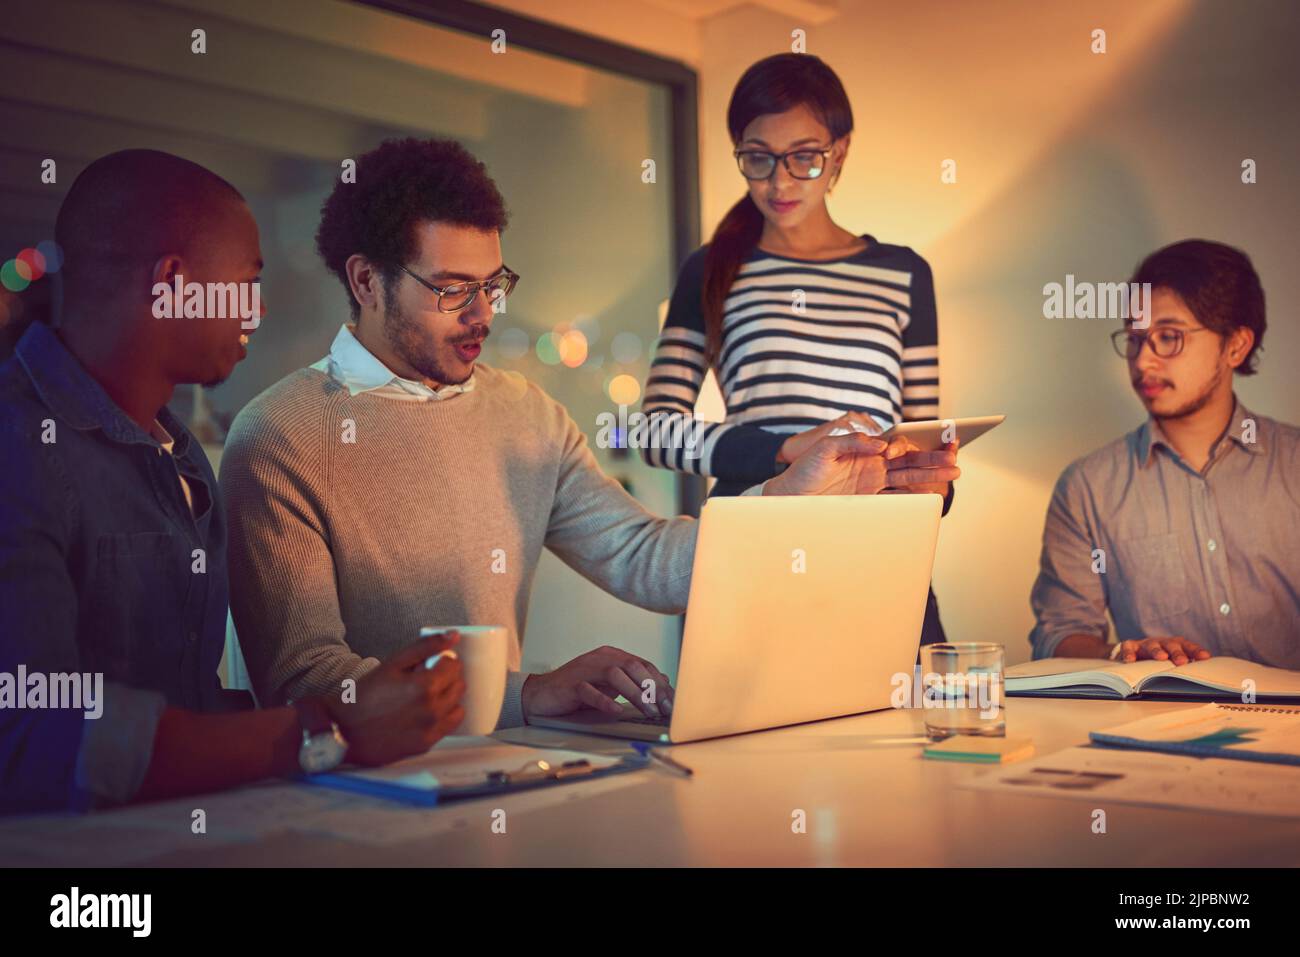 Making full use of the extra hours they have. a group of designers working late in an office. Stock Photo